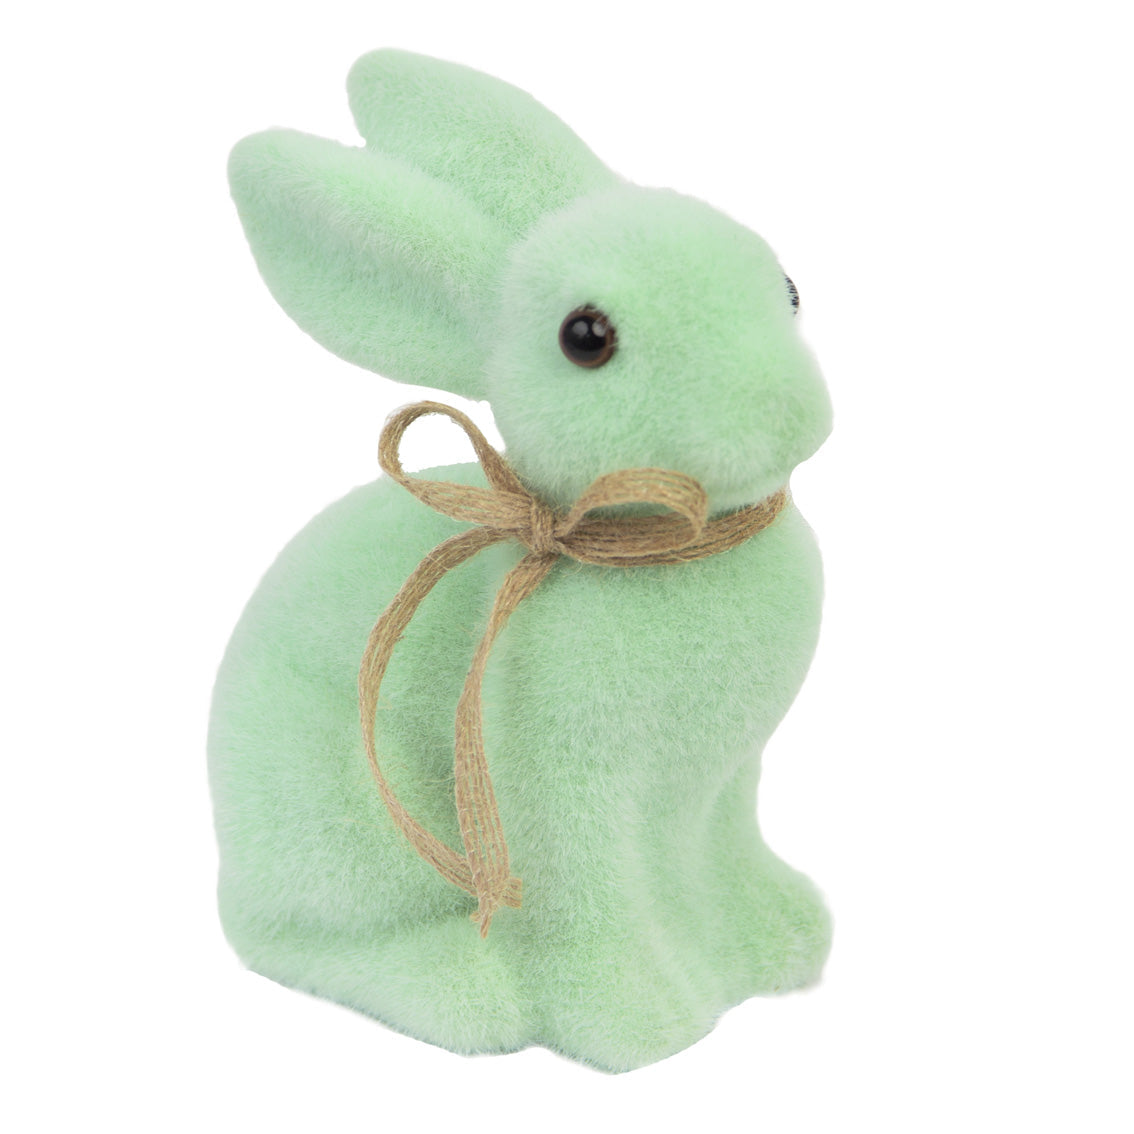 Grass Bunny Table Decoration - Sage Green by penny black